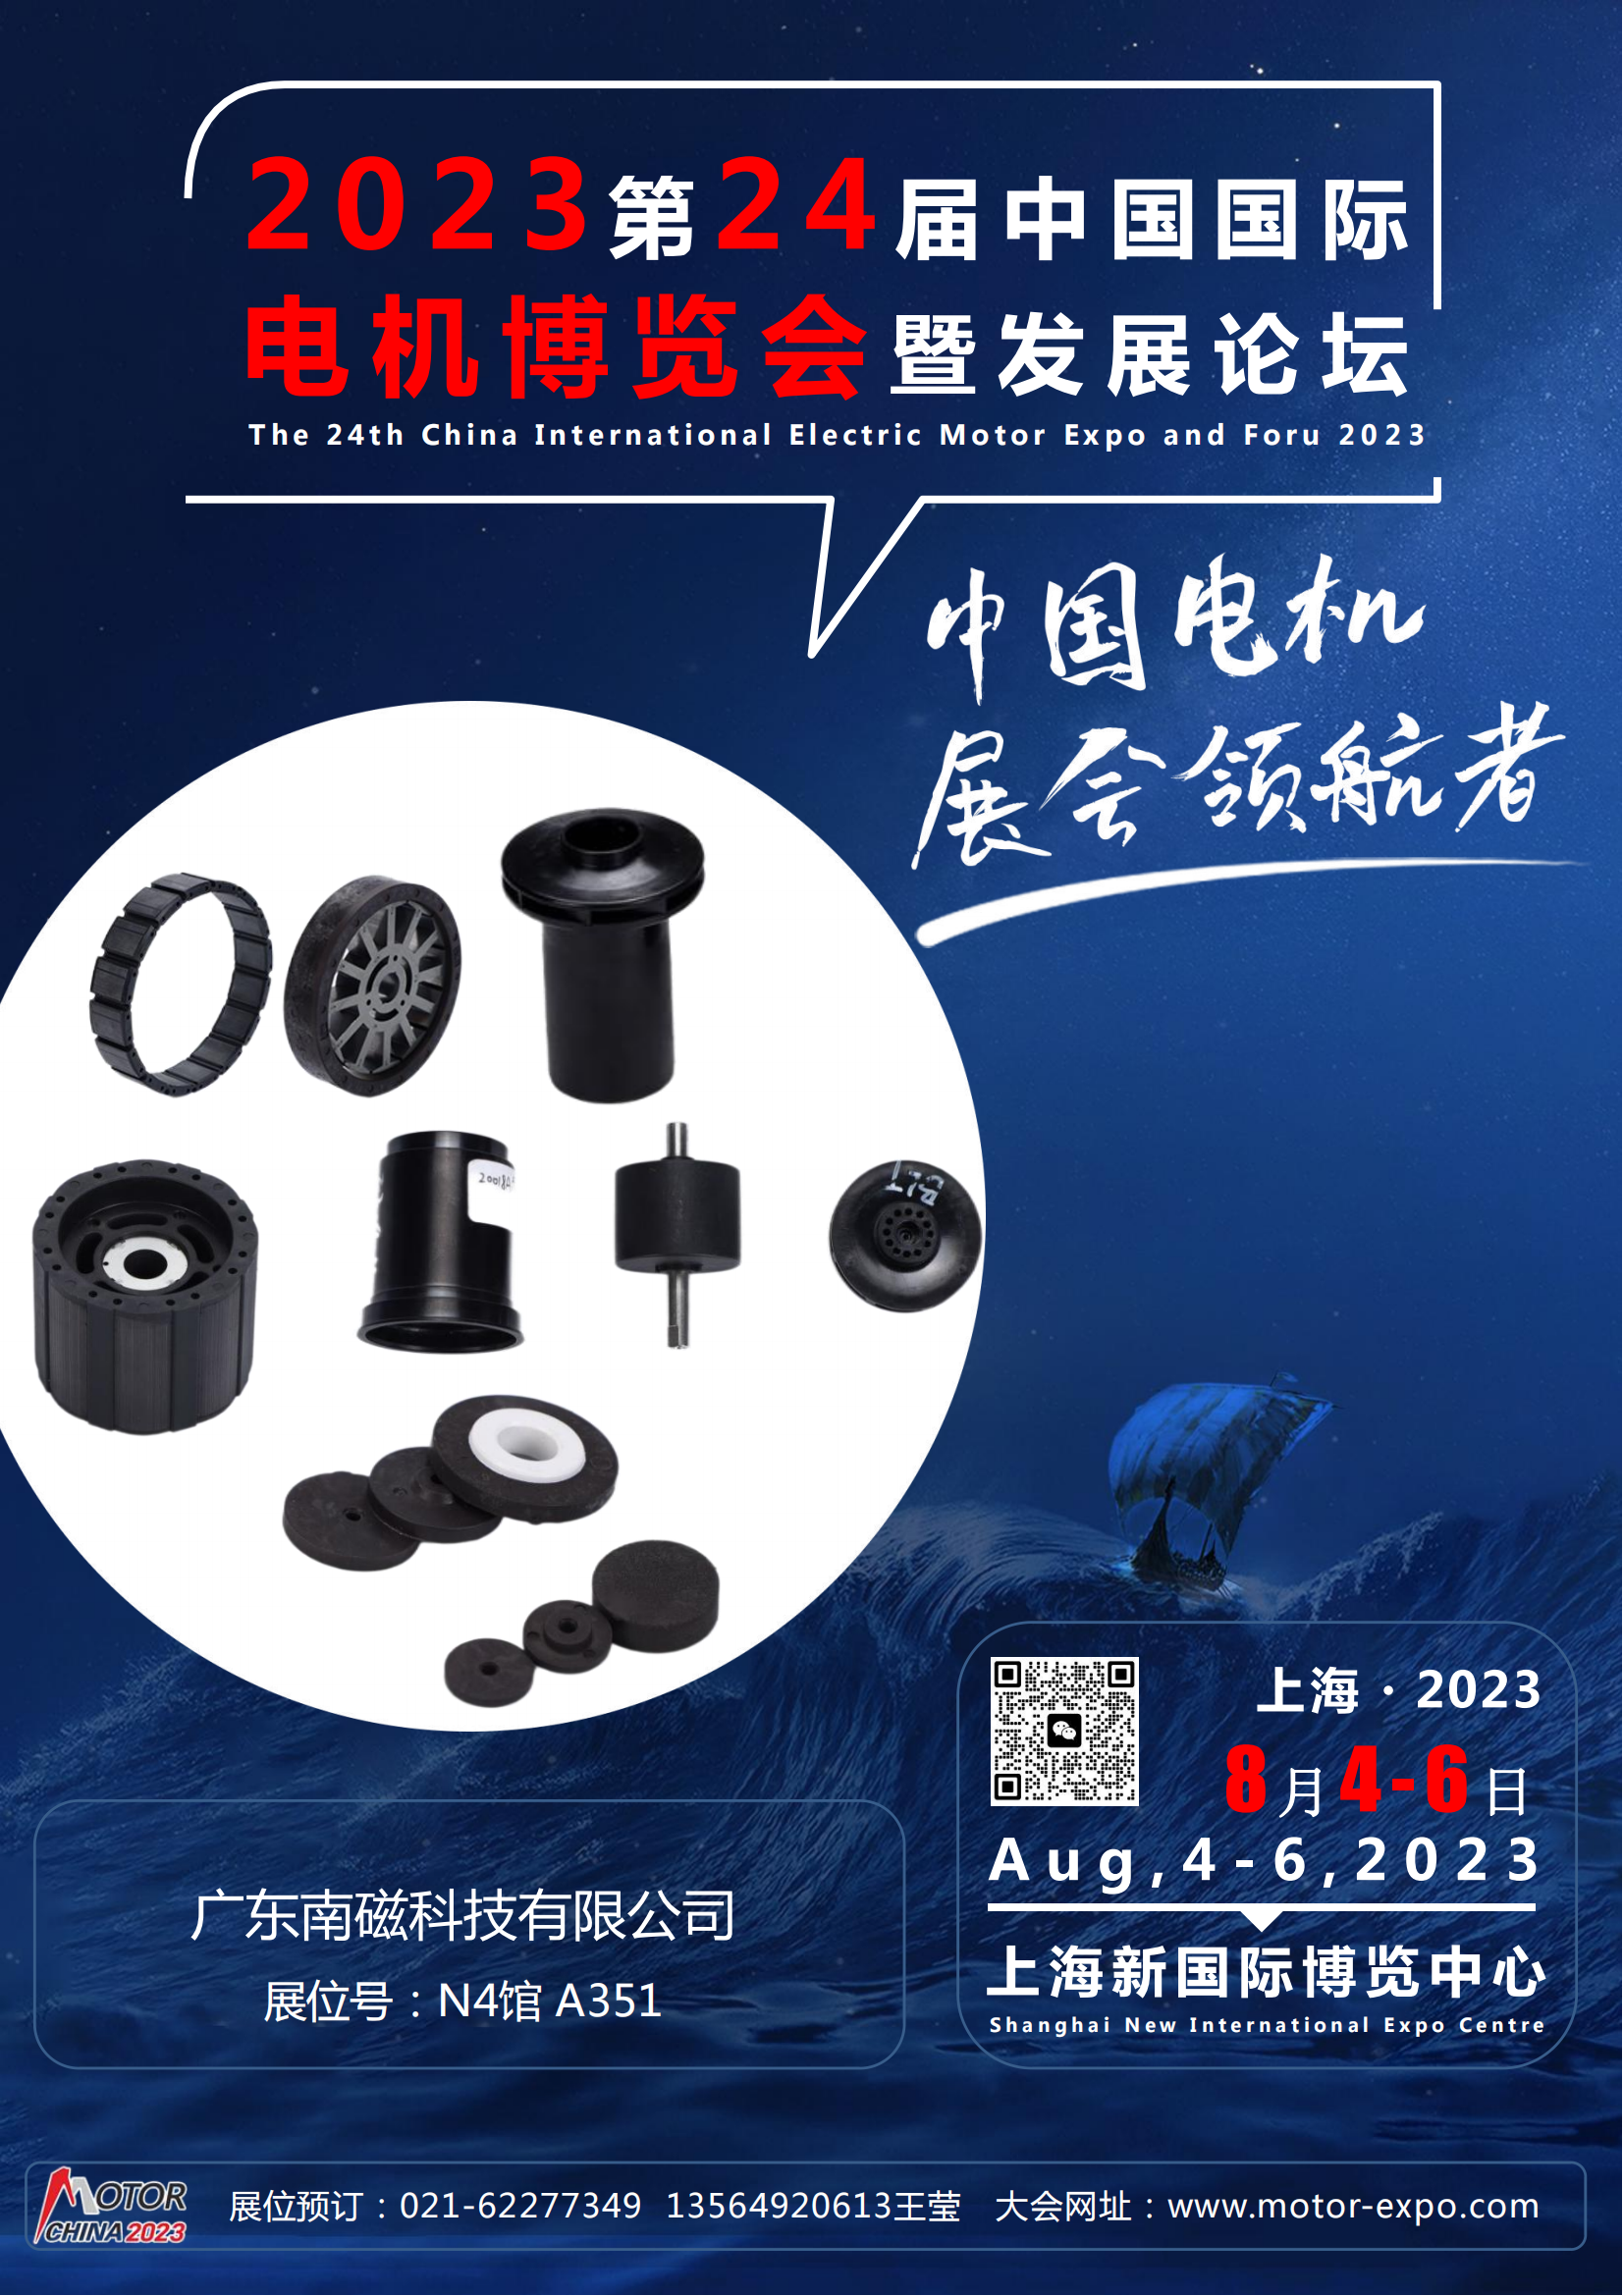 The 24th China International Electric Motor Expo and Foru 2023